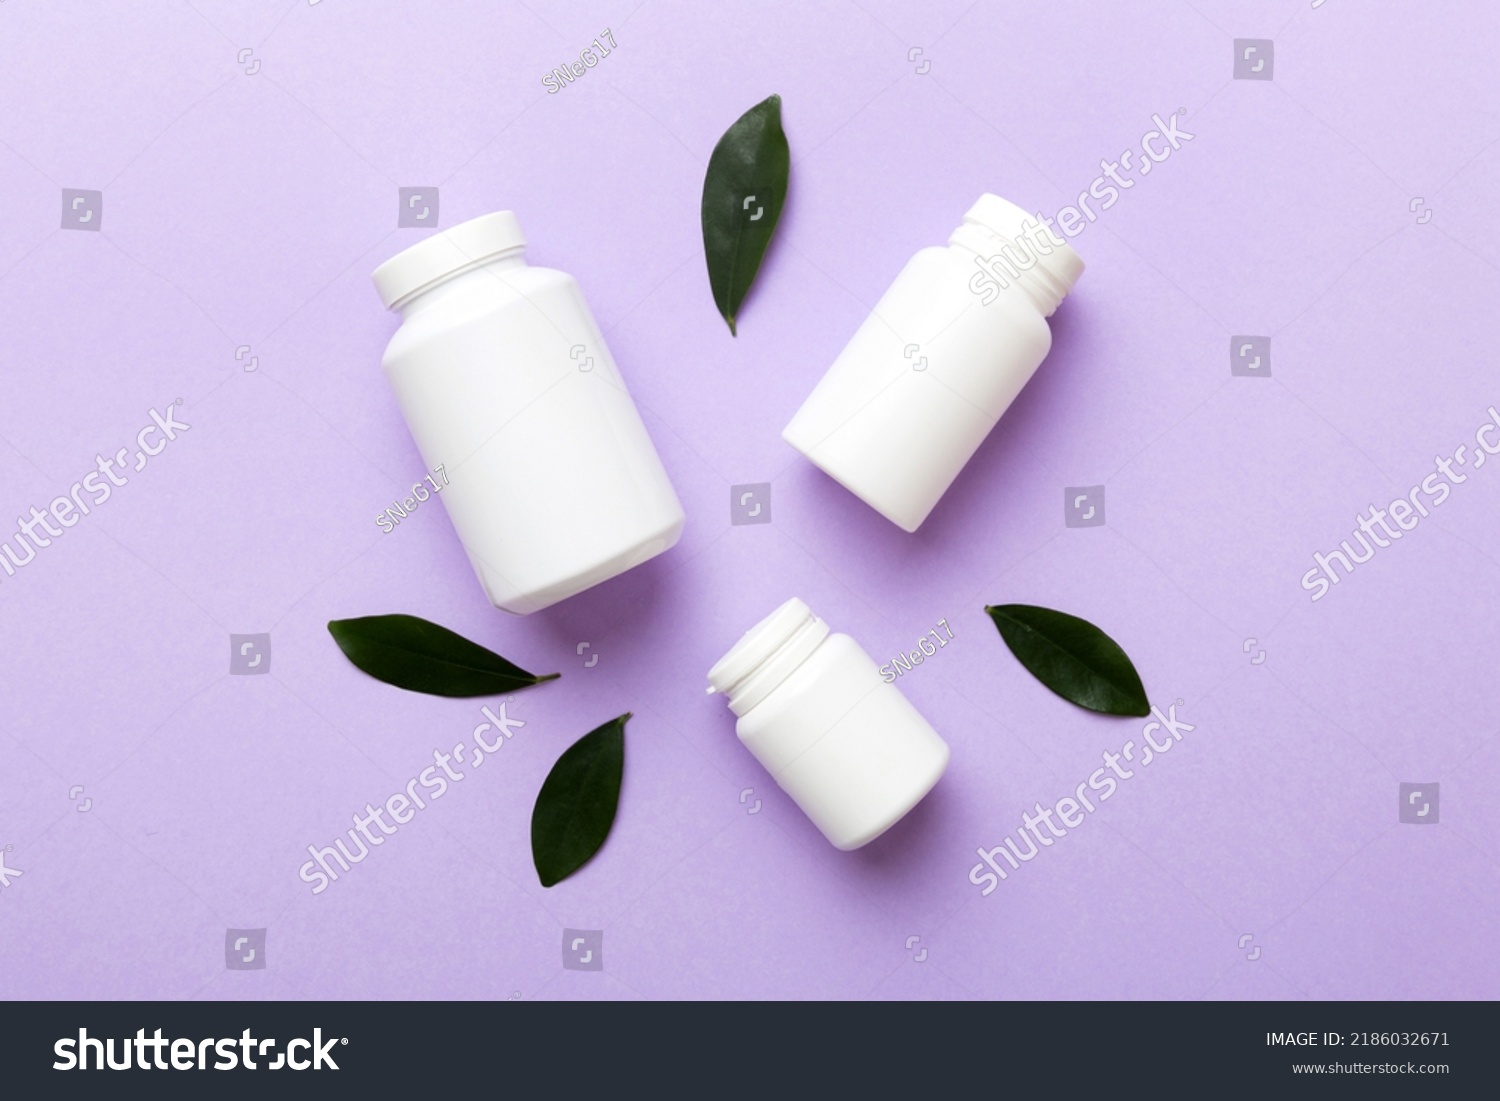 supplement pills with medicine bottle health care and medical top view. Vitamin tablets. Top view mockup bottle for pills and vitamins with green leaves, natural organic bio supplement, copy space. #2186032671